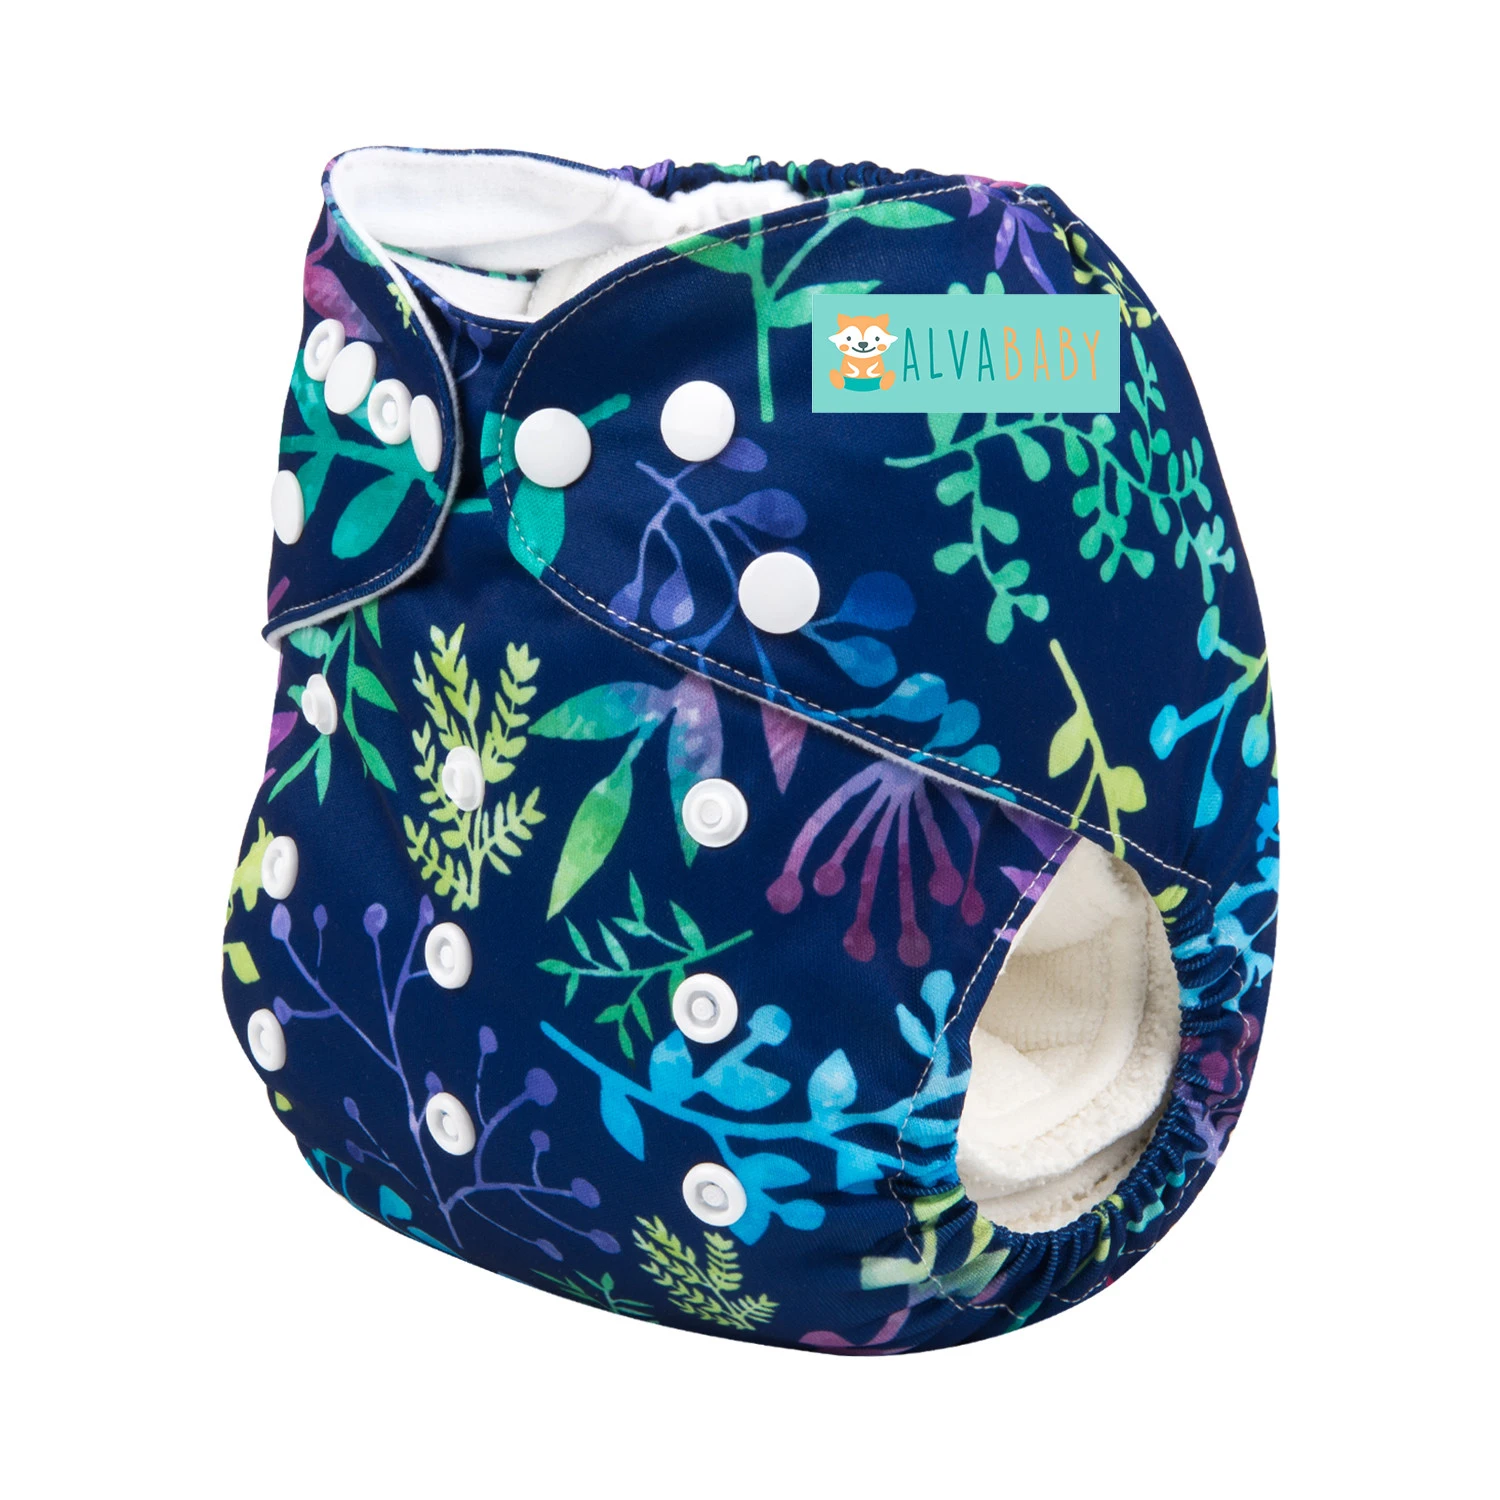 ALVABABY Leaves Print Baby Cloth Nappy Washable Cloth Diapers